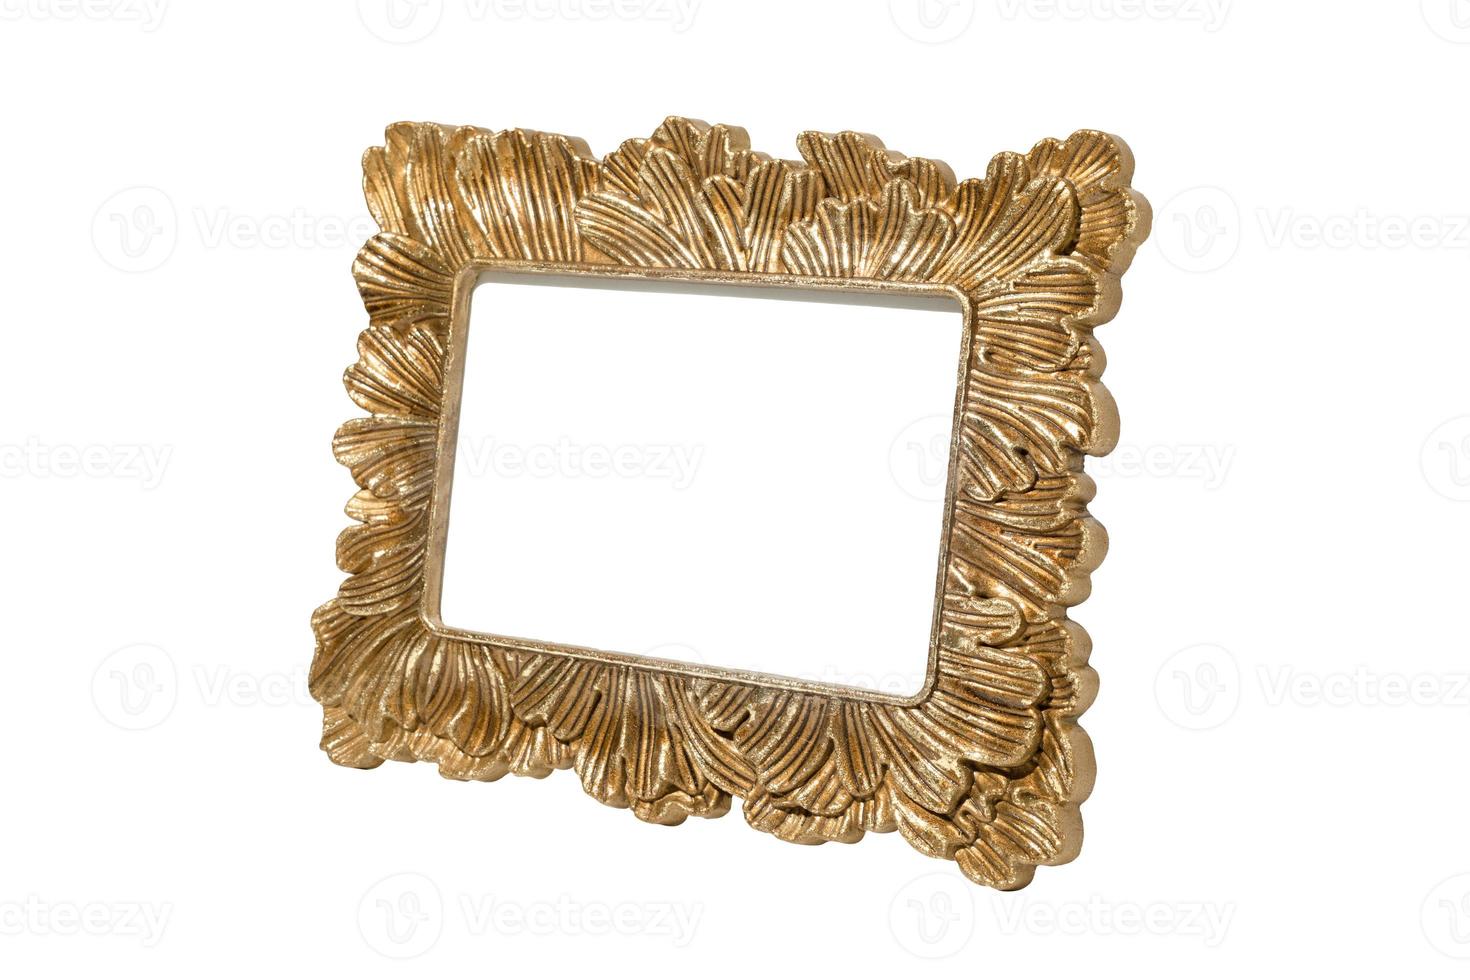 Golden picture frame empty and isolated on white background. Vintage, decorative element with free space for your design or text. Frame mockup. photo